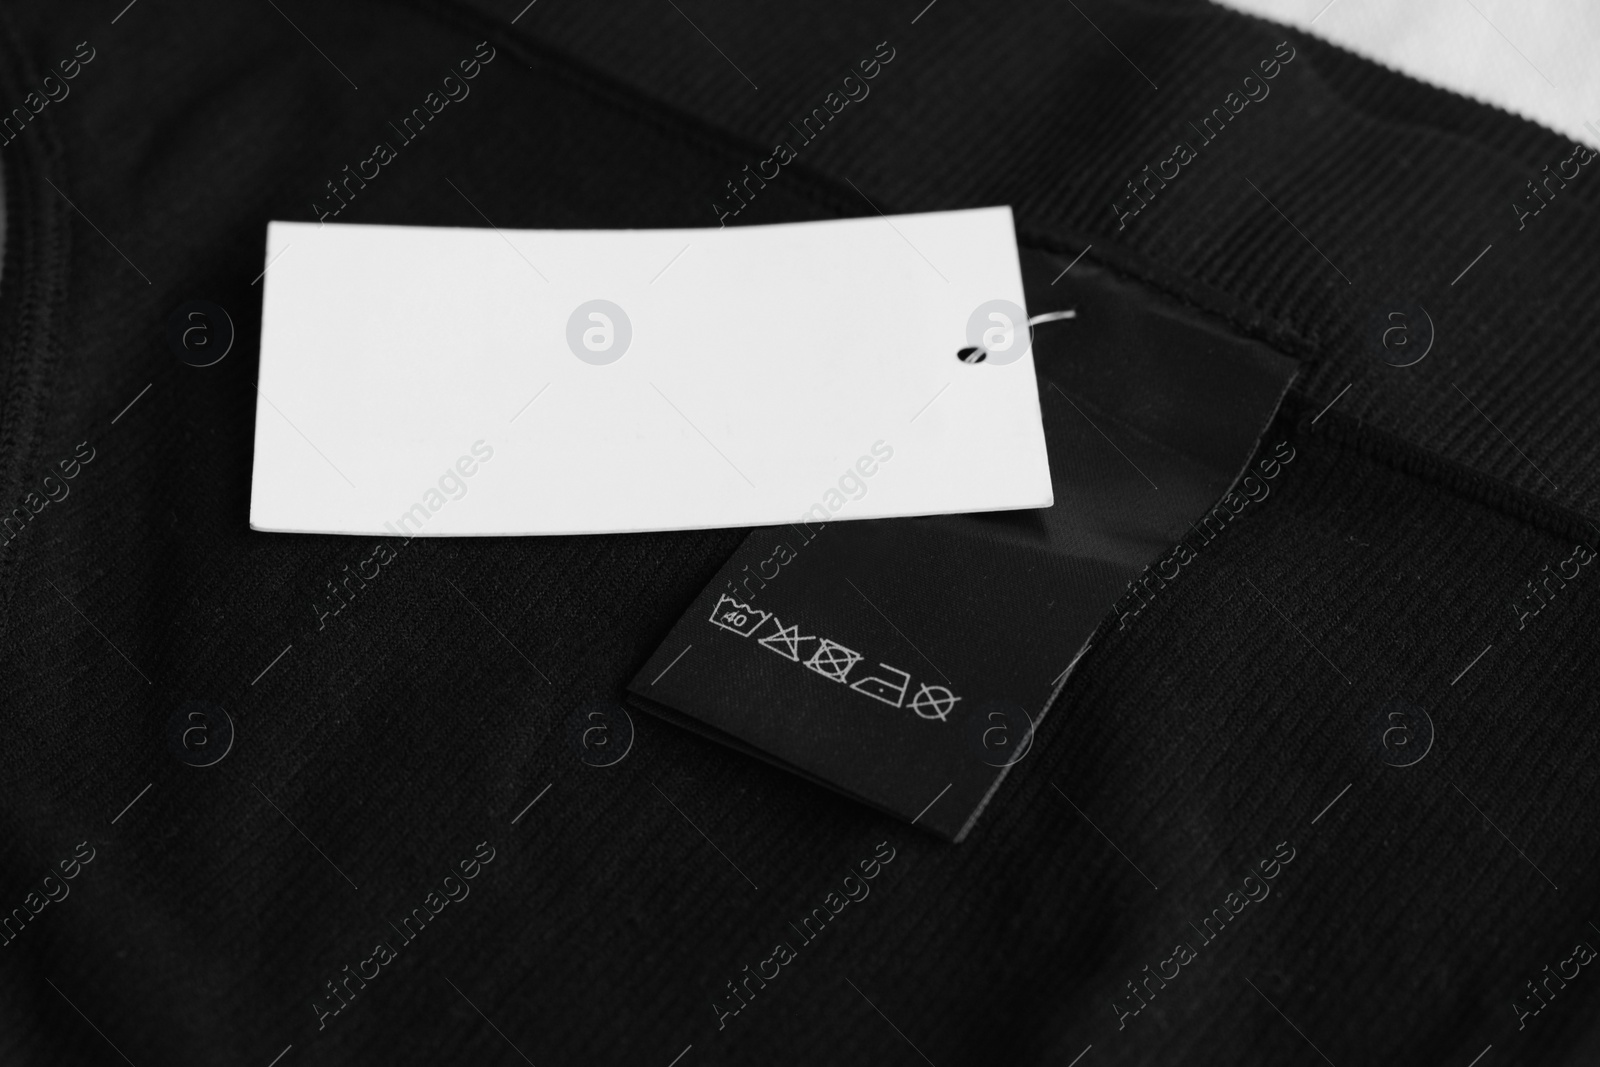 Photo of Clothing label with care information and tag on black garment